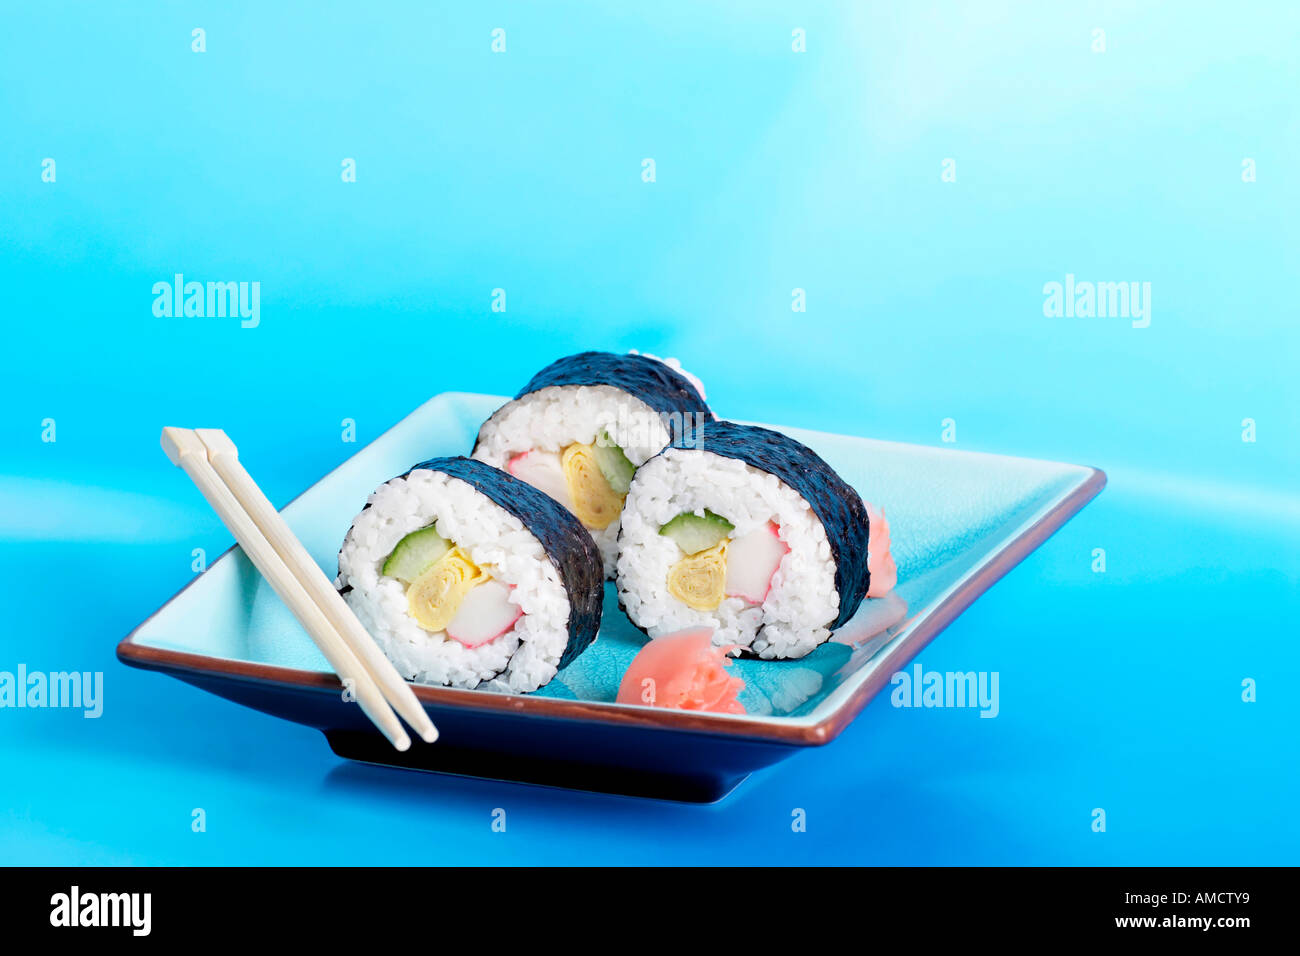 Plate of sushi with ginger and chopsticks Stock Photo